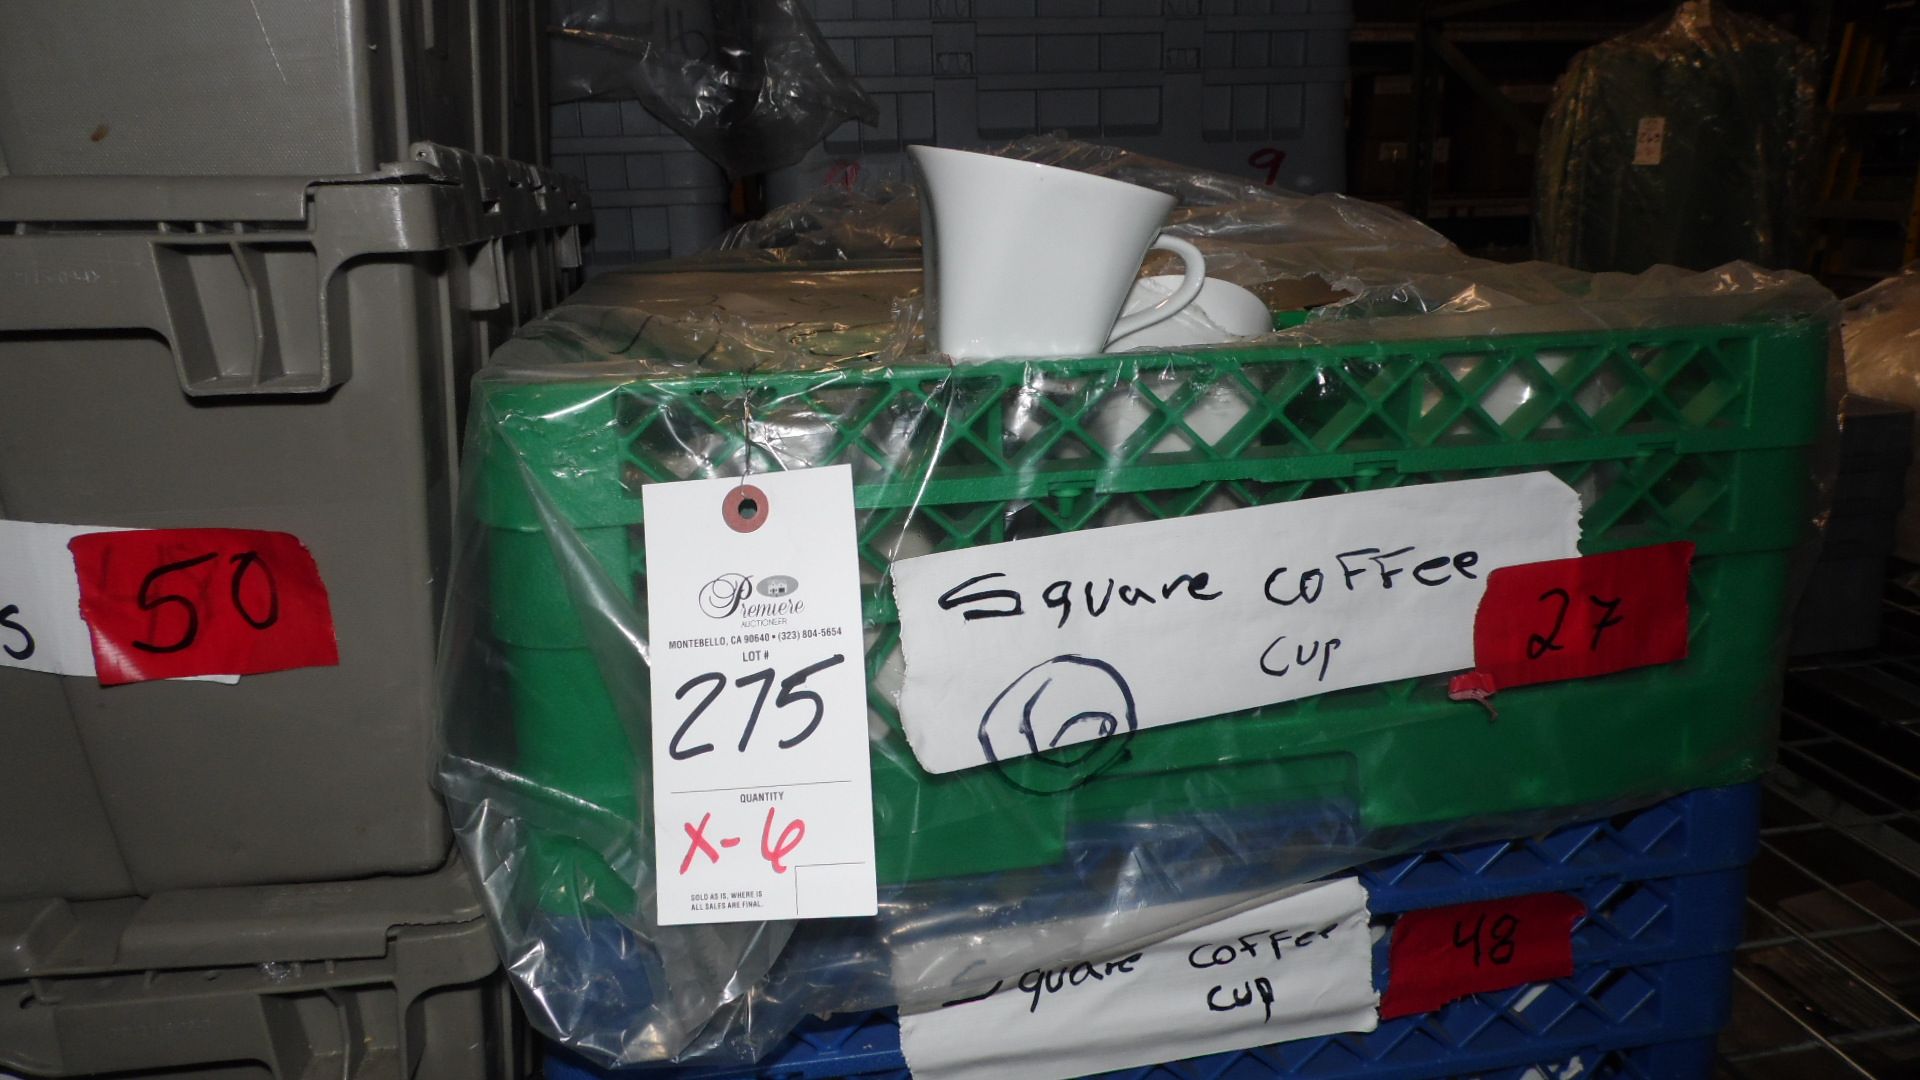 CASES OF SQUARE COFFEE CUPS